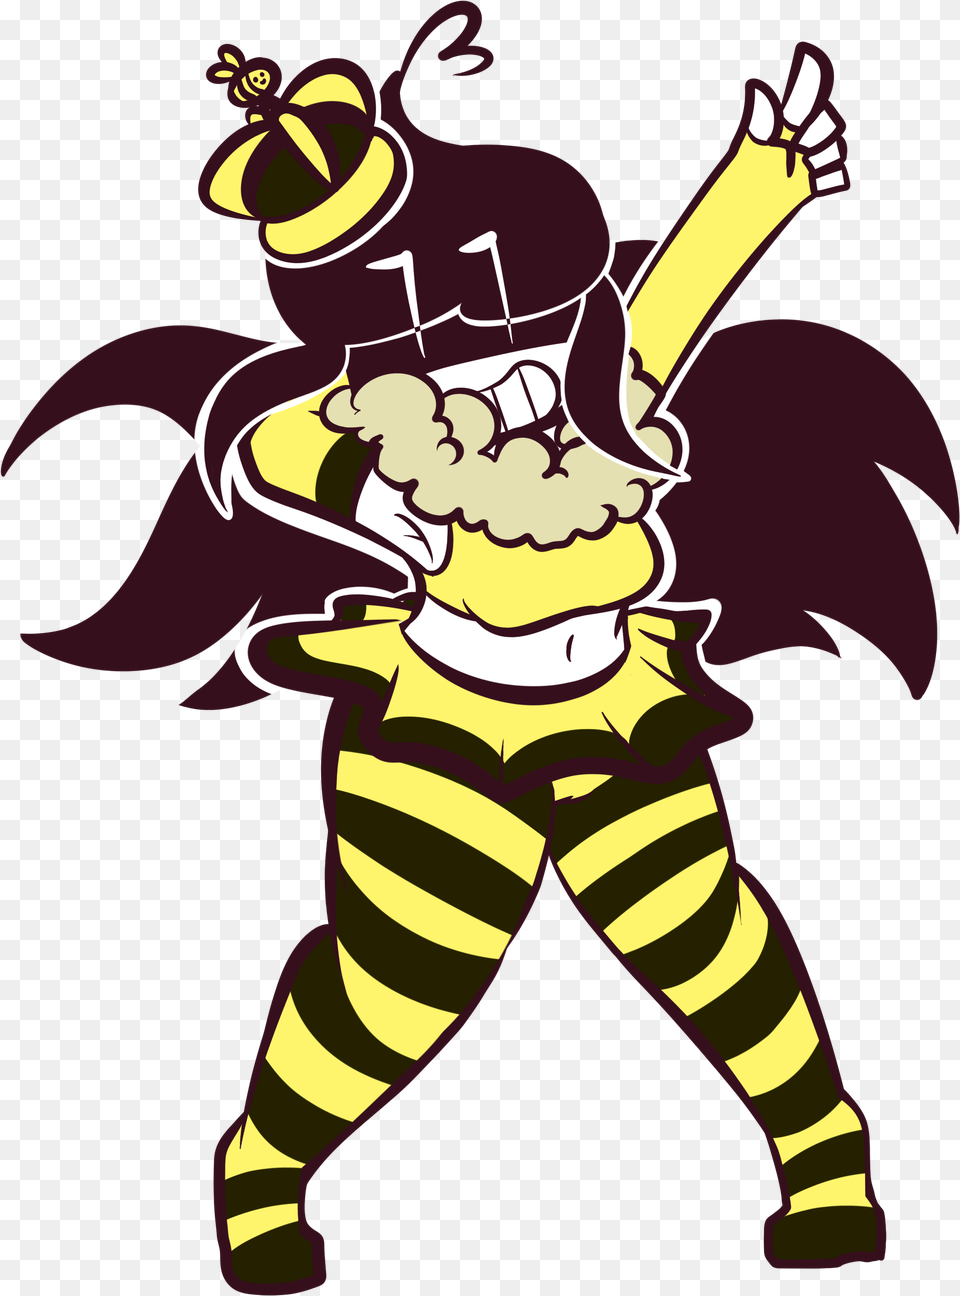 Download Queen Bee Jay Cartoon Full Size Image Pngkit Fan Art Queen Bee Terraria, Animal, Invertebrate, Insect, Wasp Free Transparent Png